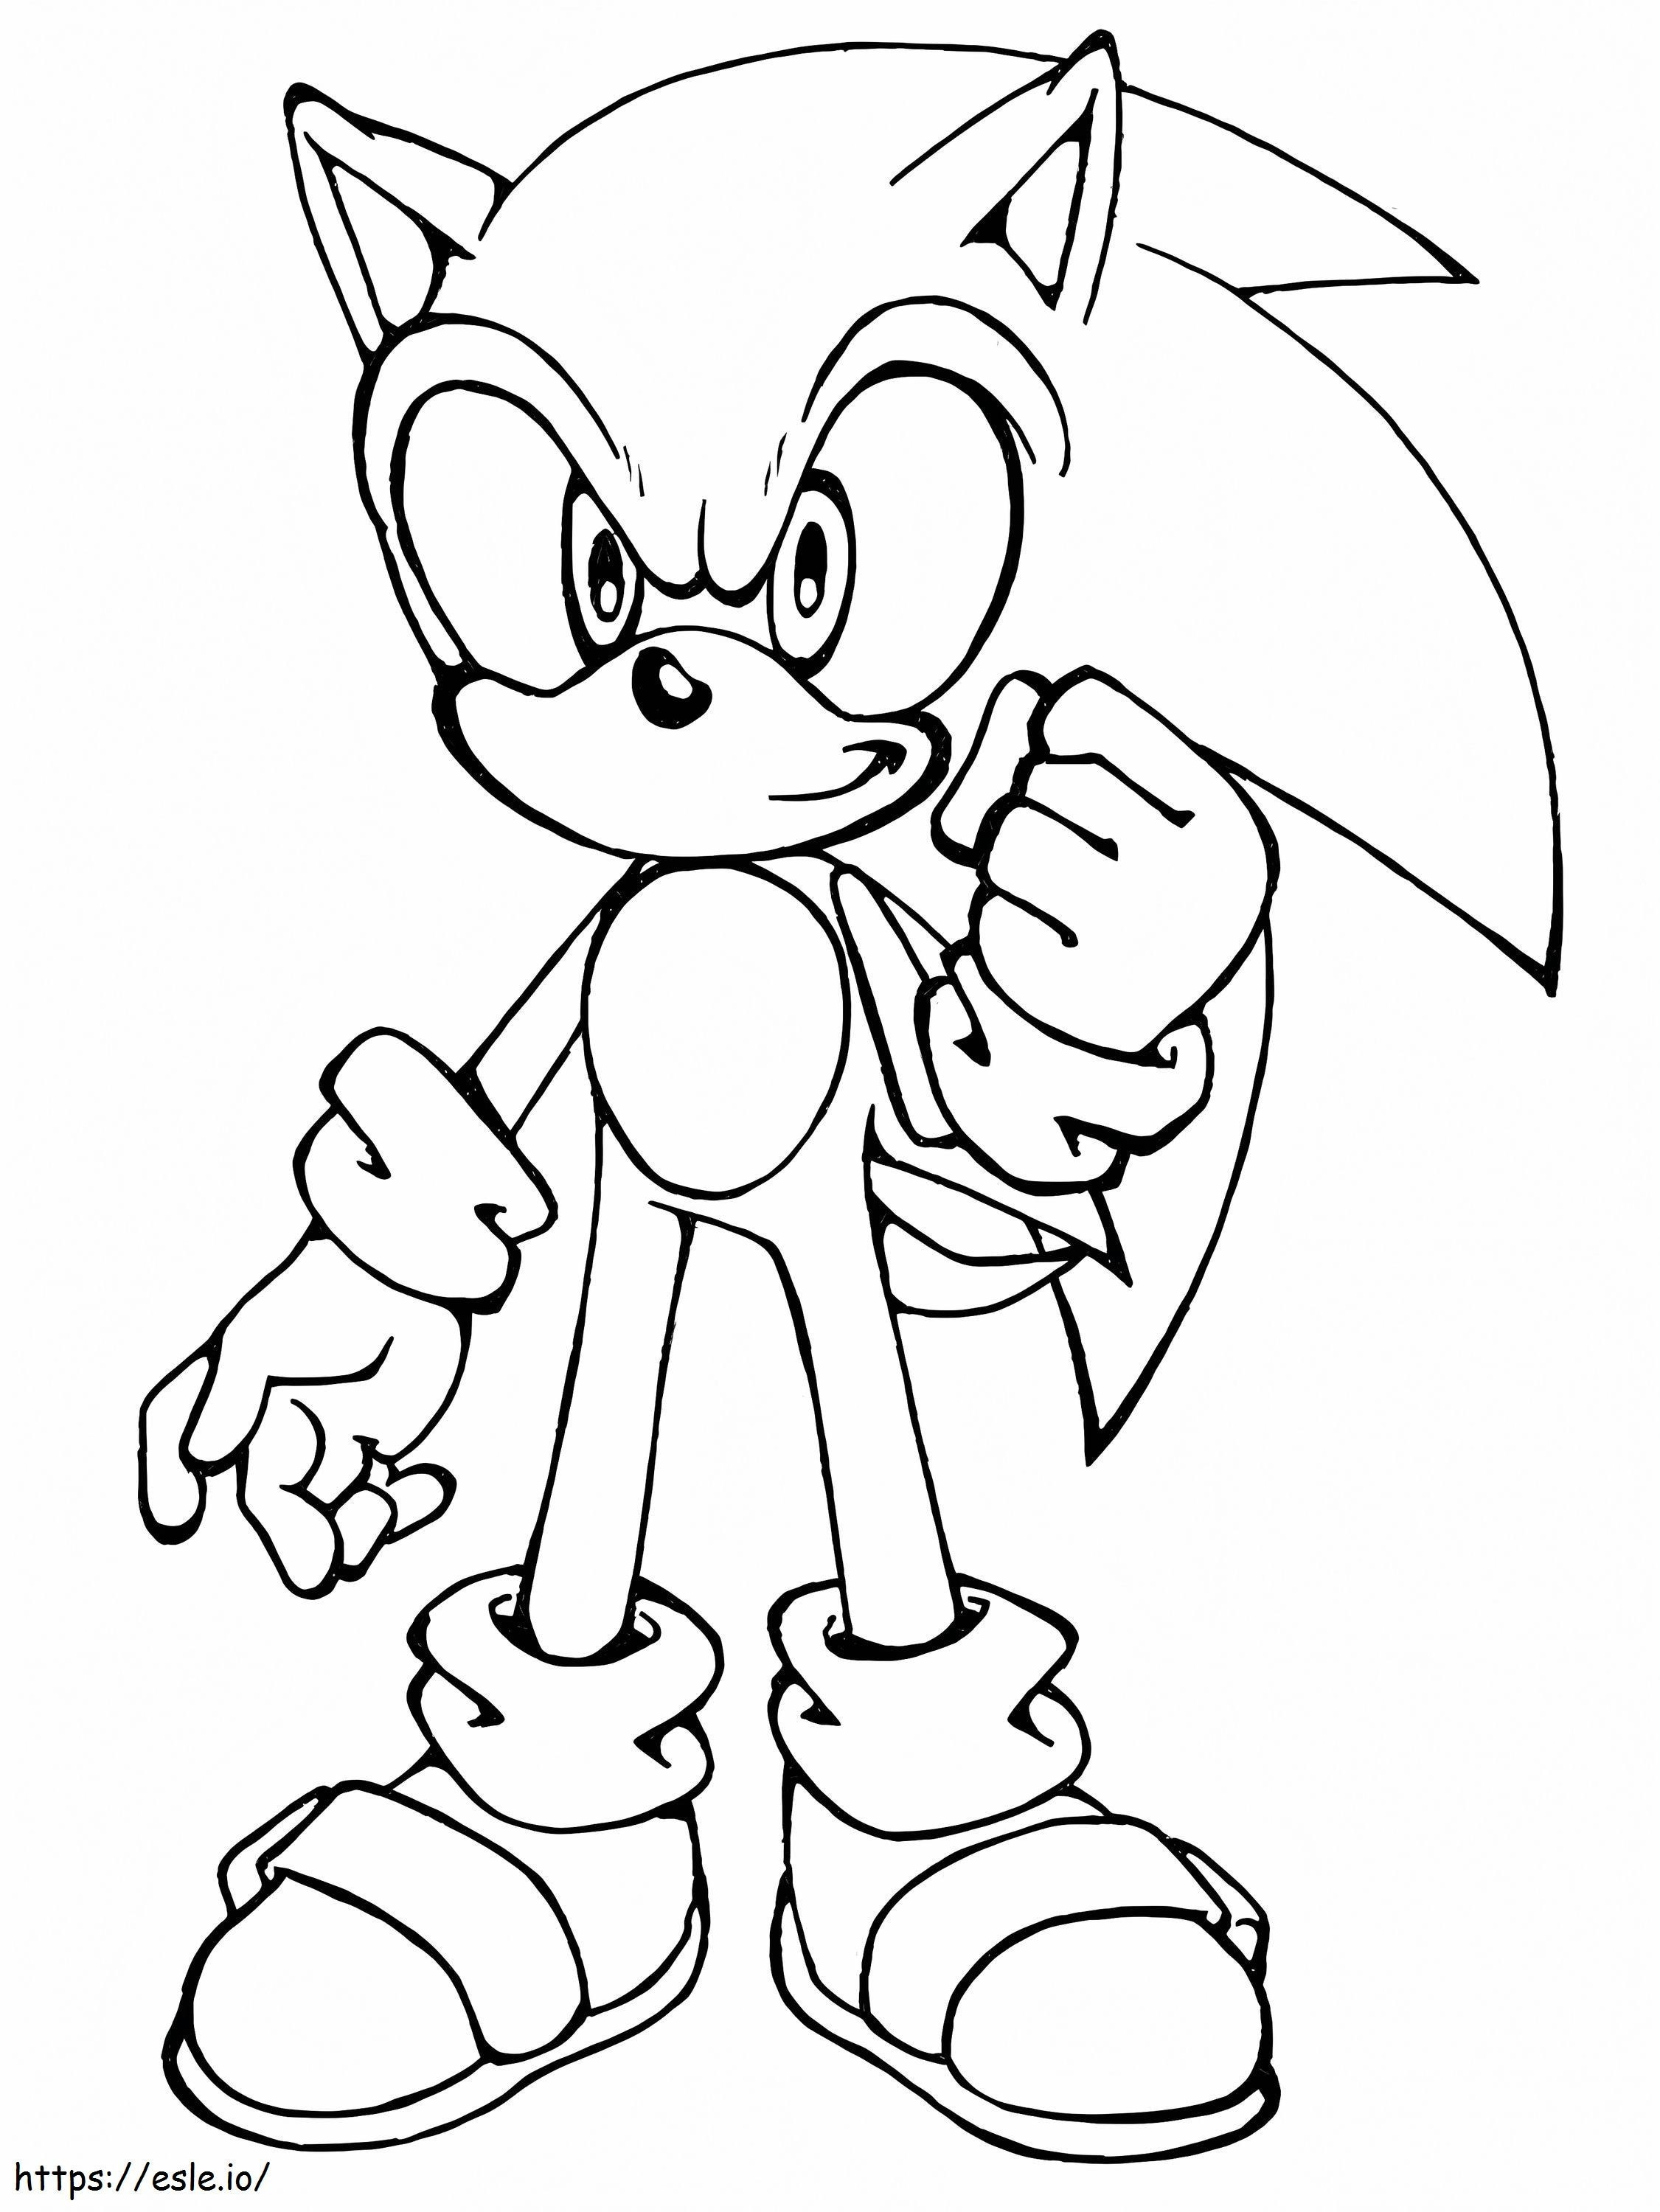 Sonic 2 coloring page